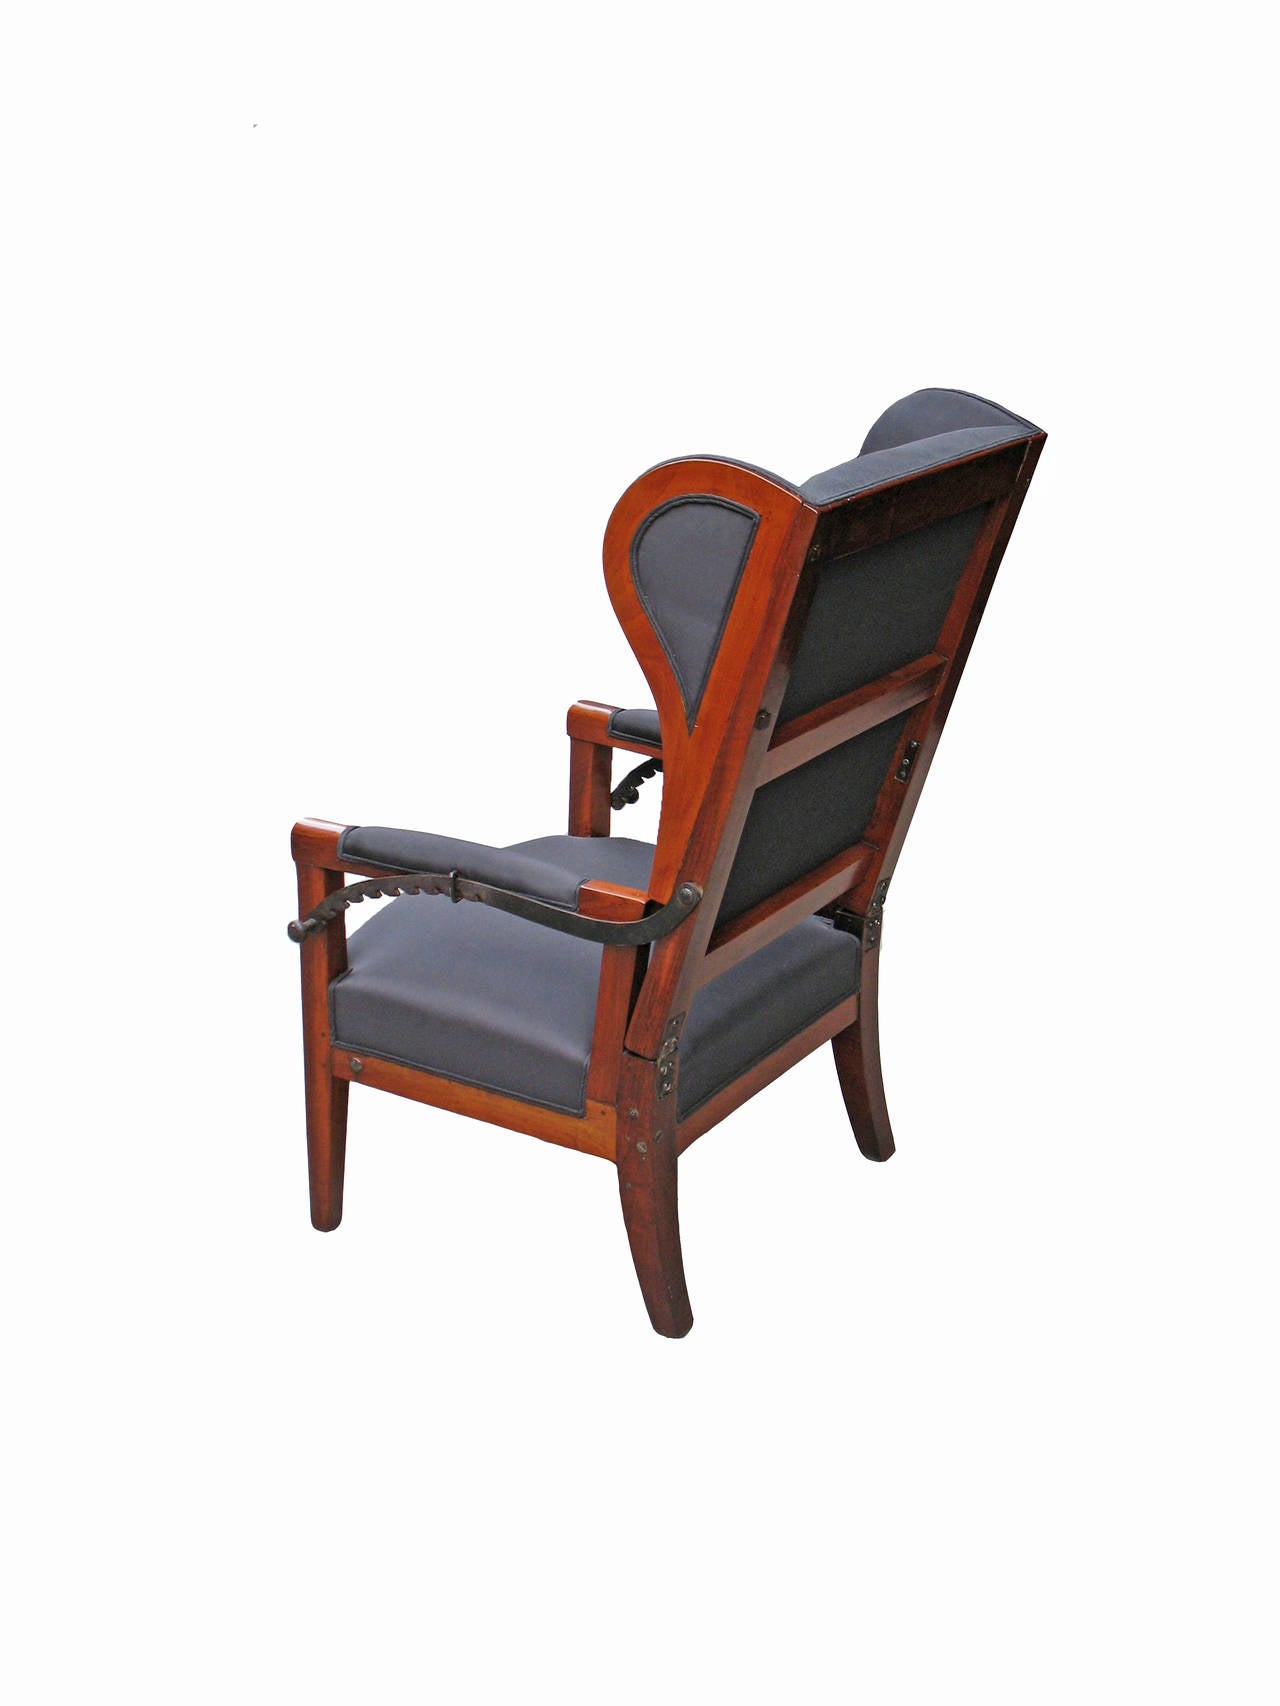 A wing chair characteristic for this furniture type in South Germany, but very special with an adjustable seat back. It's mechanism is original and functional. Solid walnut frame shellac based French re-polished. Re-upholstered with webbing,